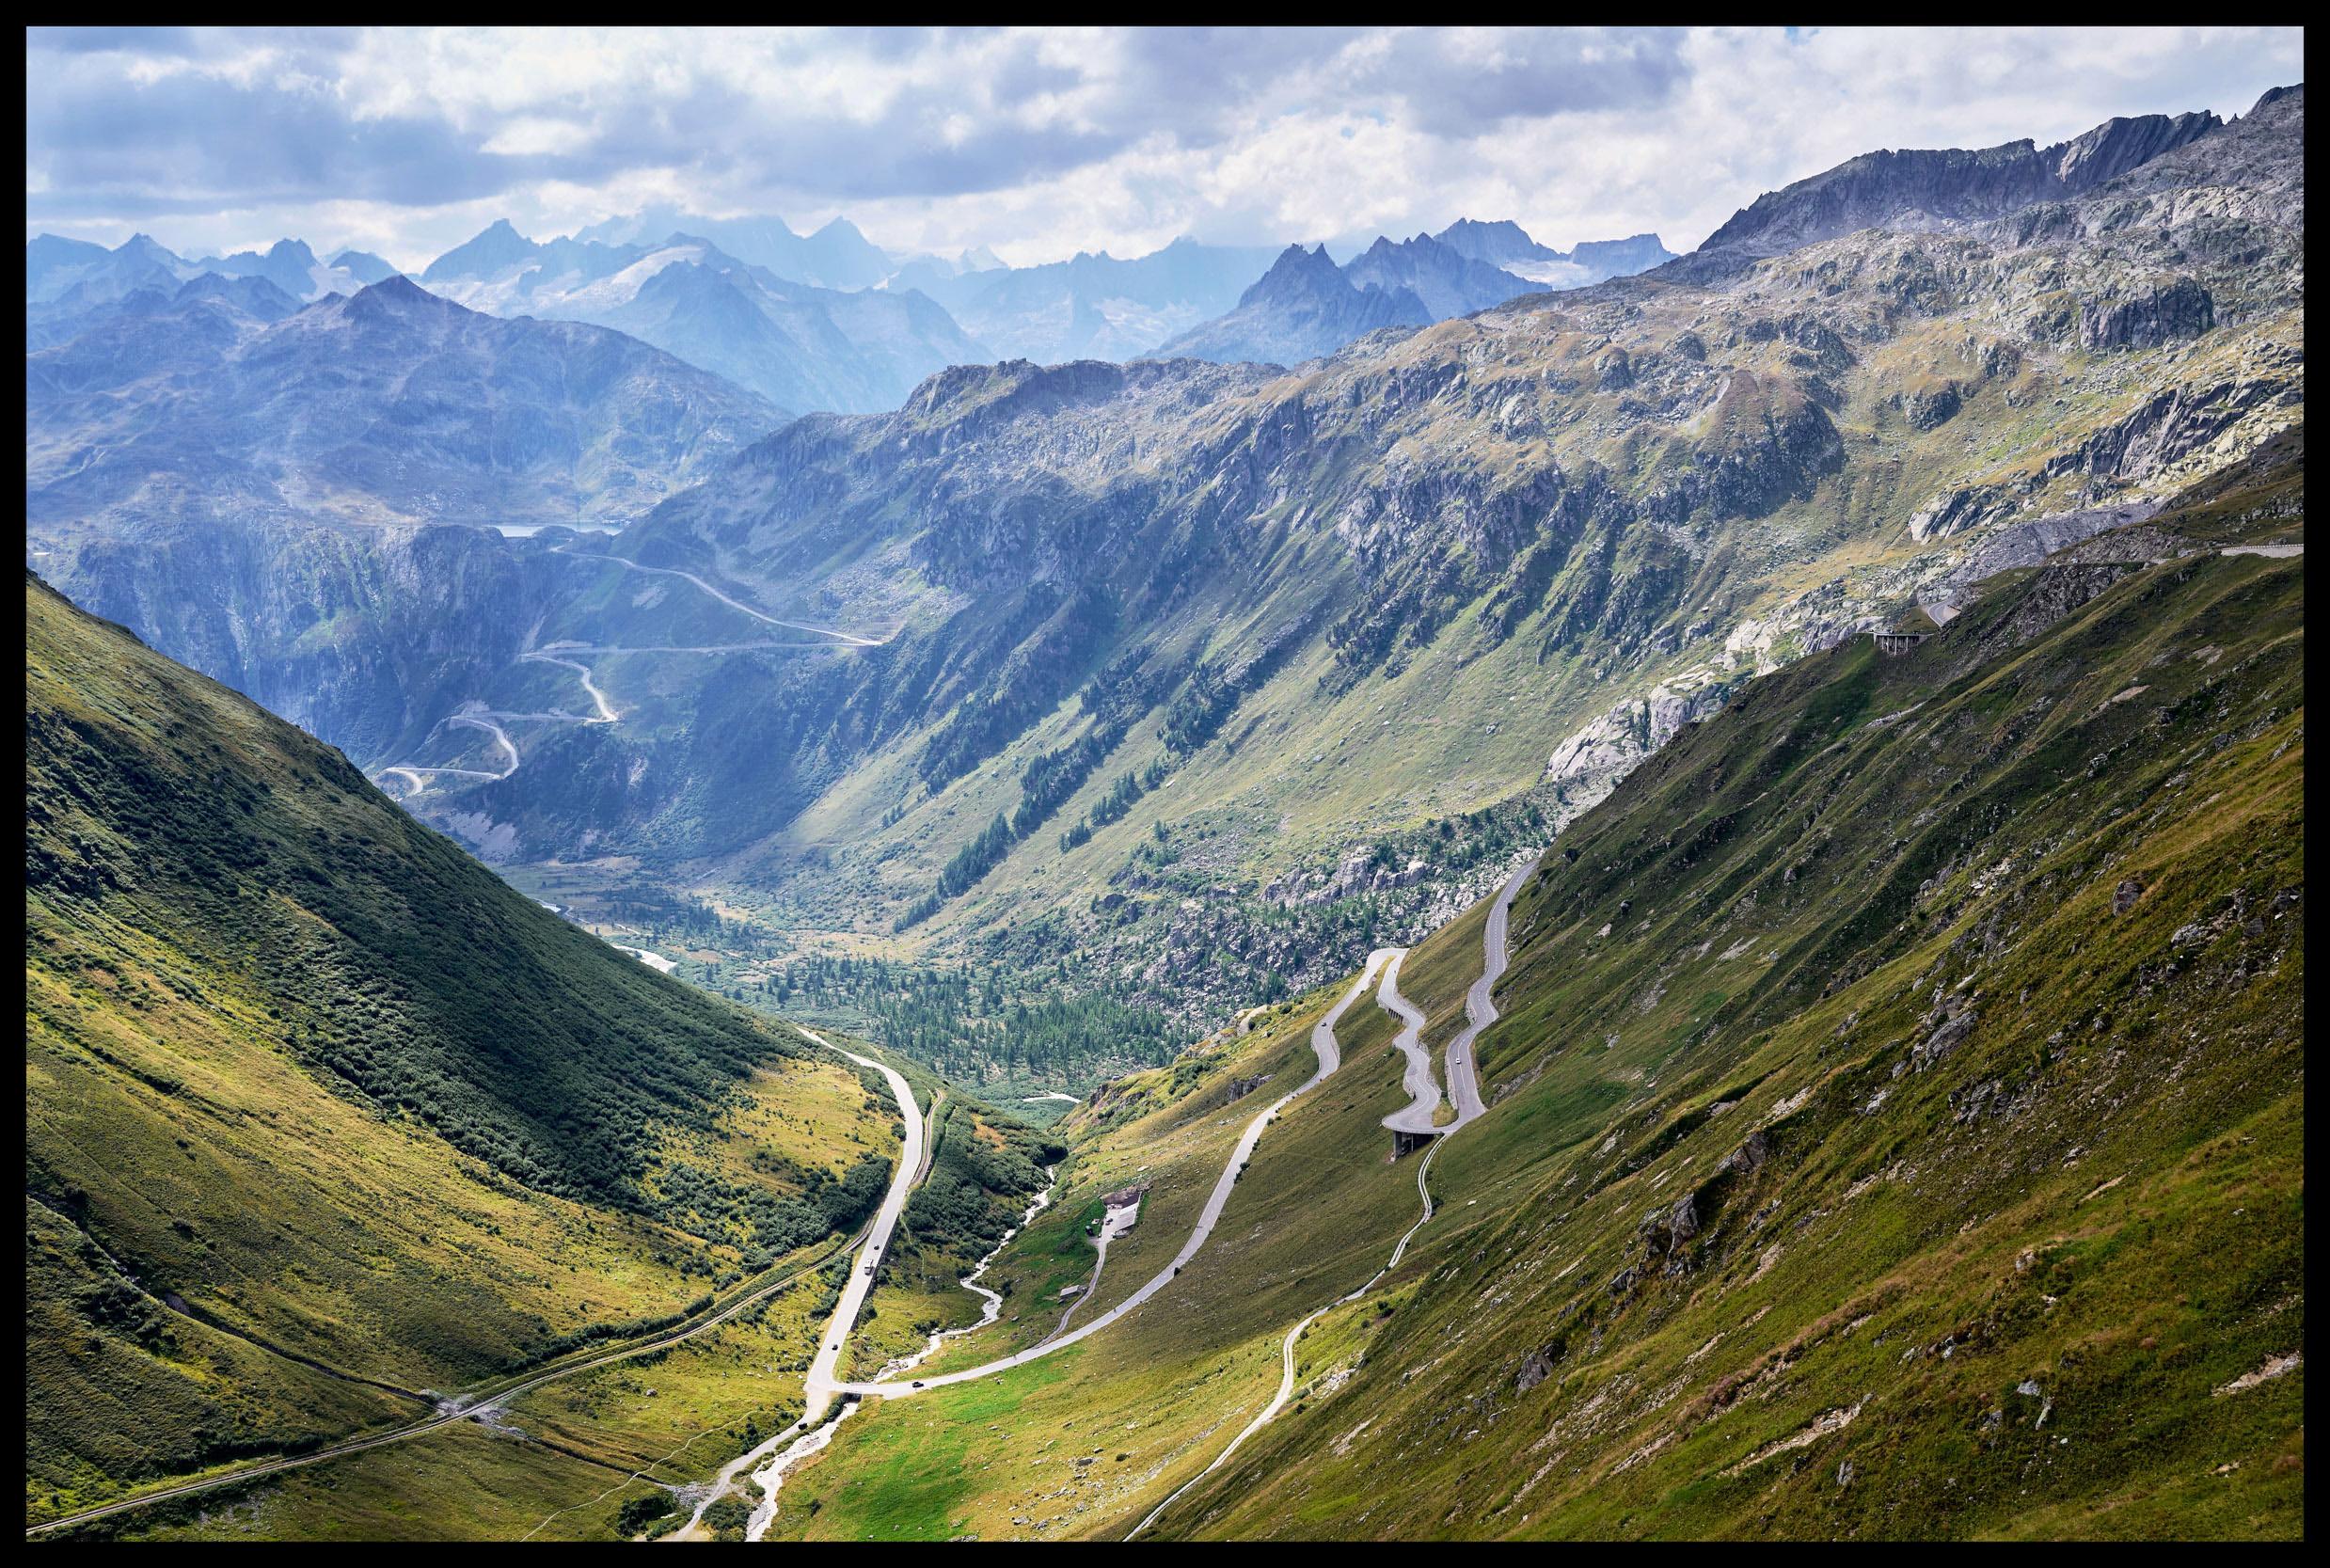 The valley linking the Swiss Furka and Grimsel passes. [Nikon Z6ii - Nikon 40mm F2]